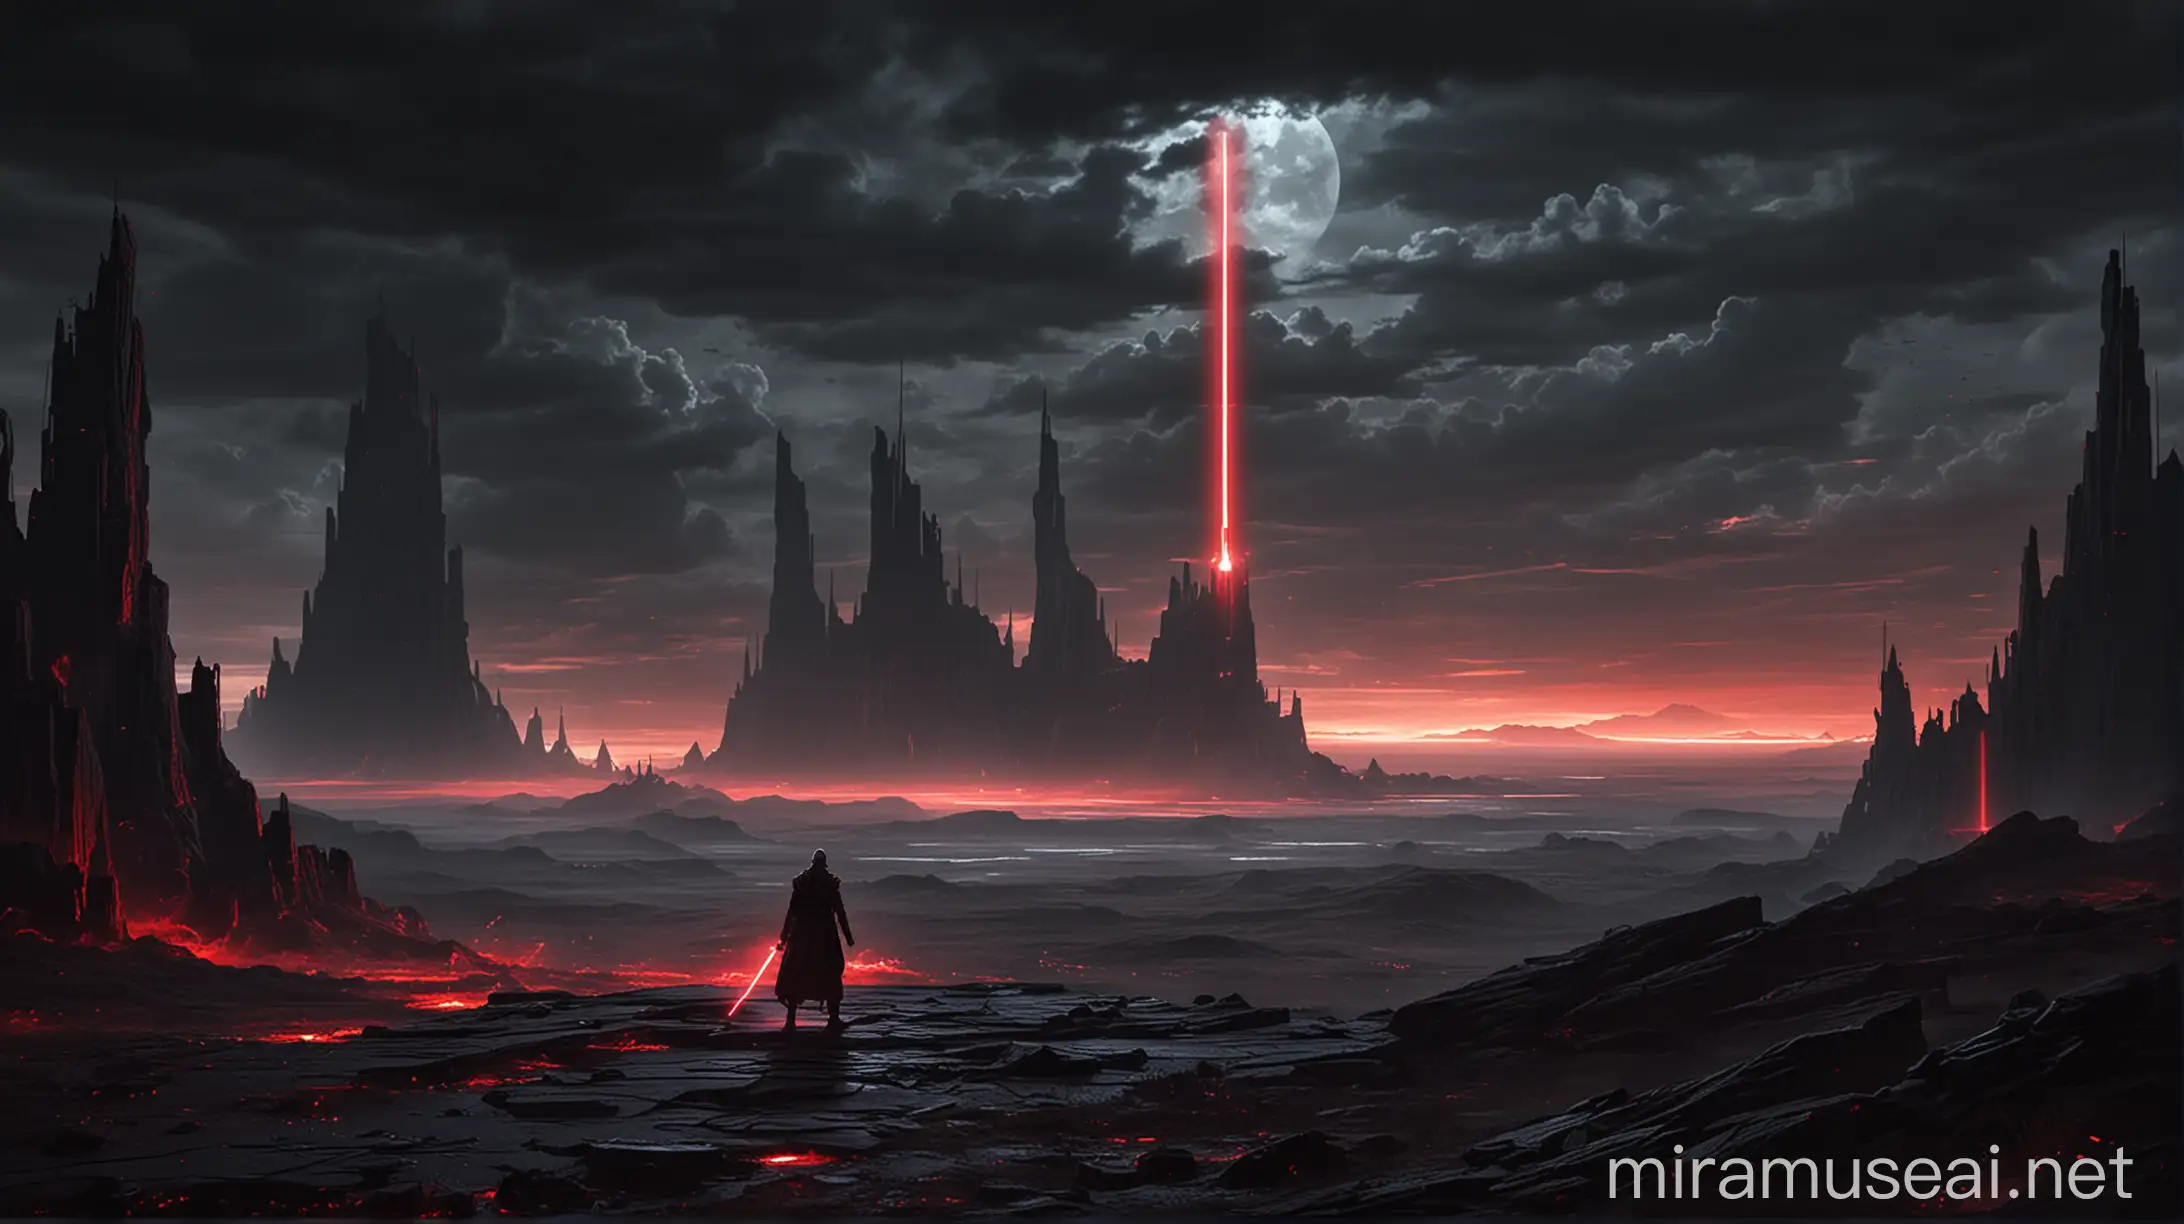 Dark Jedi amidst Apocalyptic Landscape with Distant Jedi Temple and Red Lightsaber